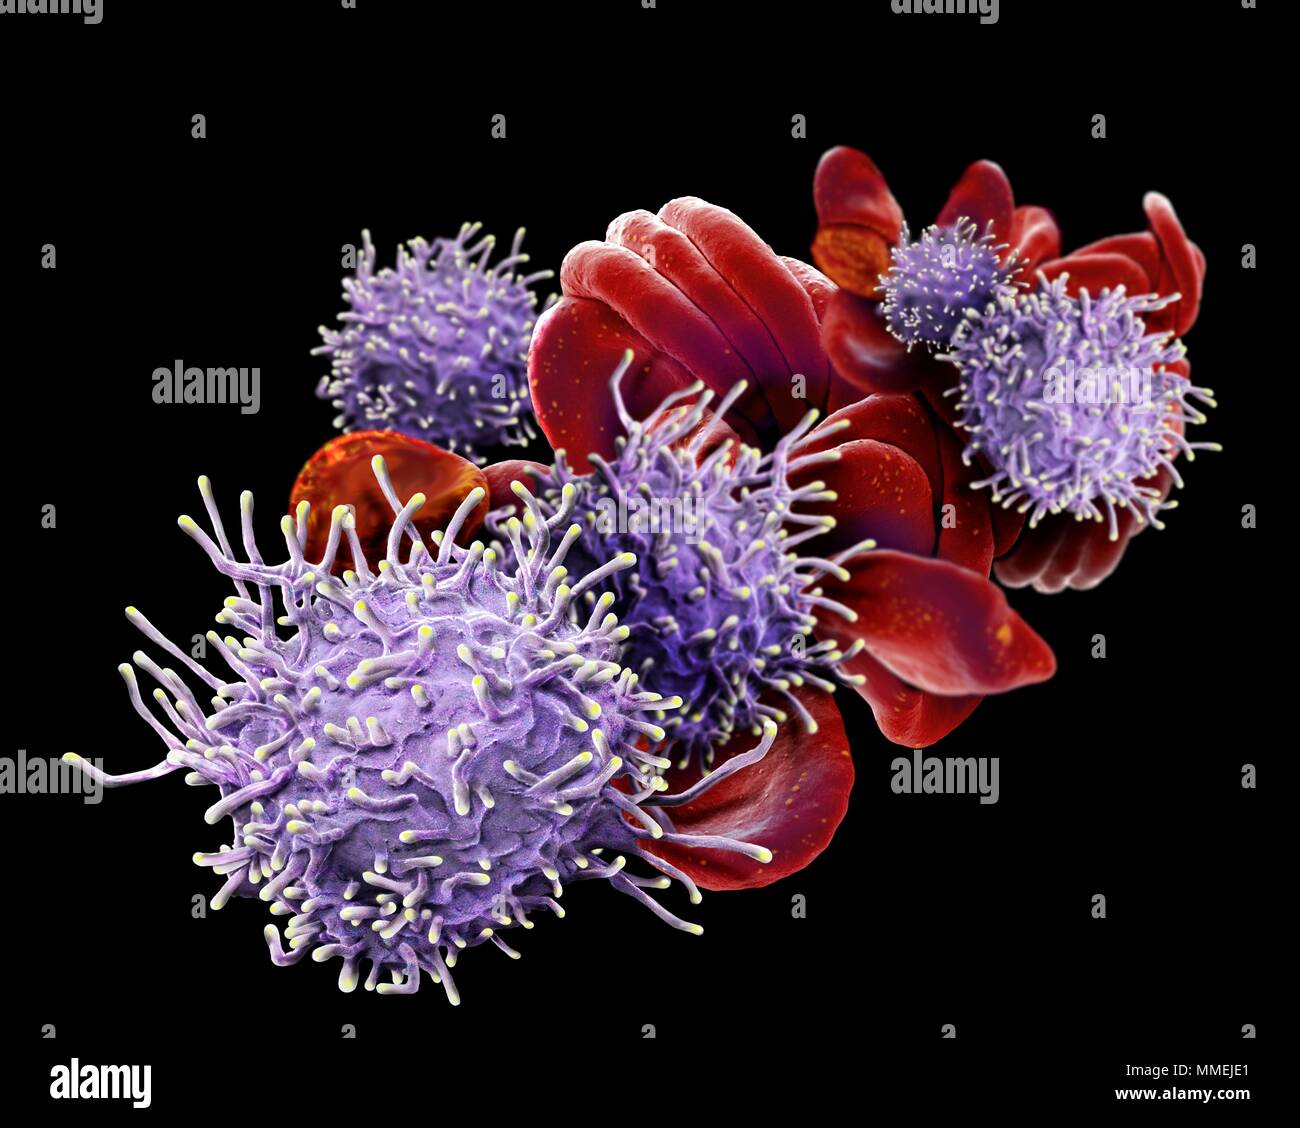 Activated T lymphocytes and red blood cells (RBCs). Coloured scanning electron micrograph (SEM) of activated T lymphocytes and RBCs from a human blood Stock Photo